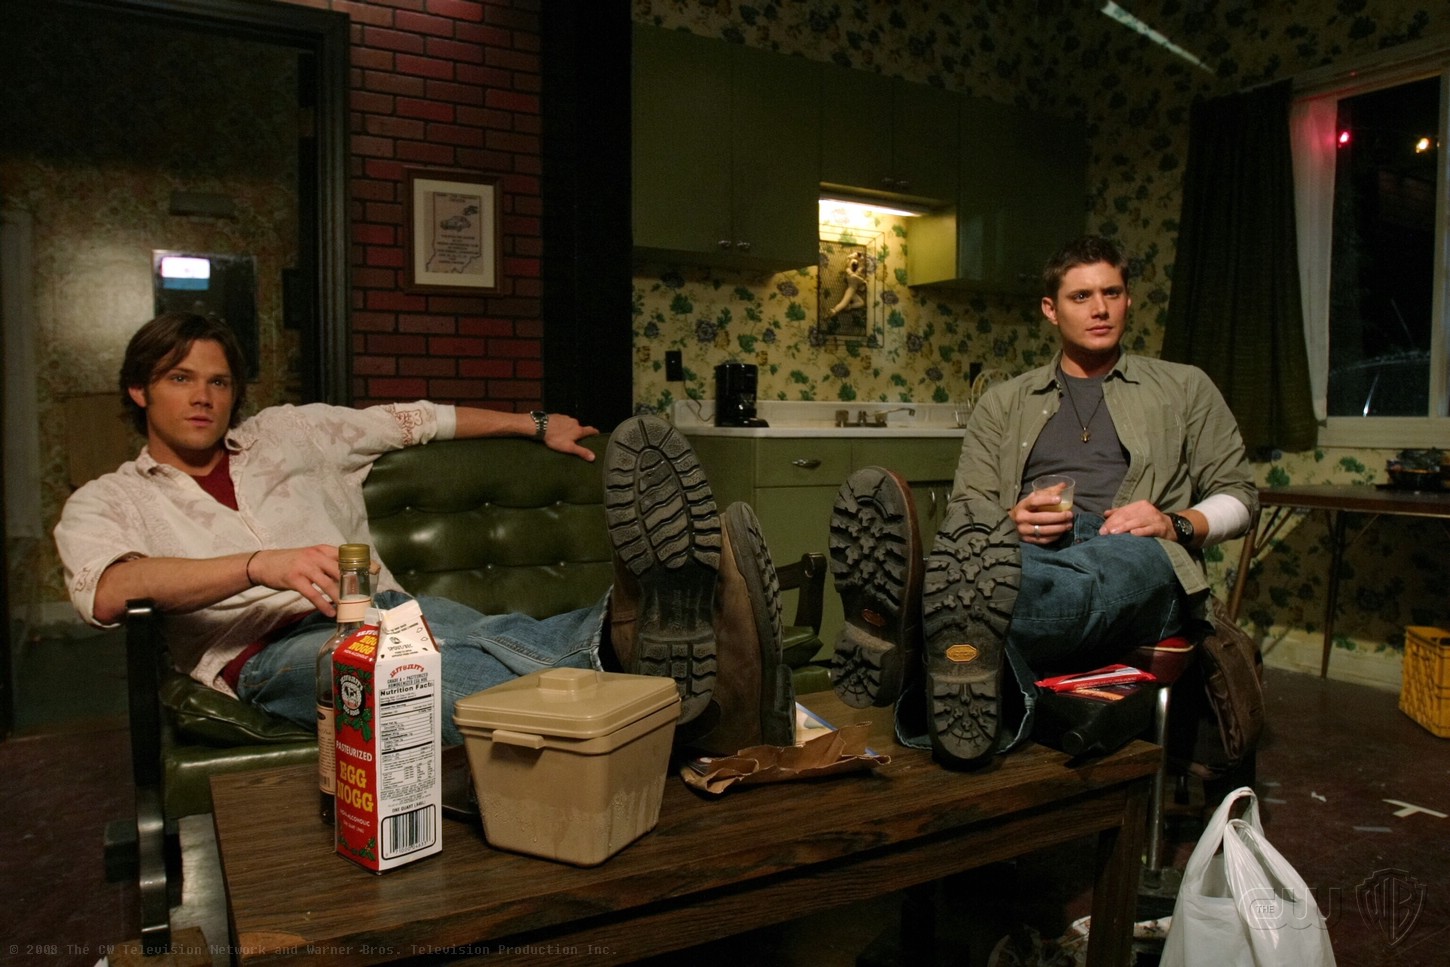 The-Winchesters-image-the-winchesters-36321748-1450-967.jpg